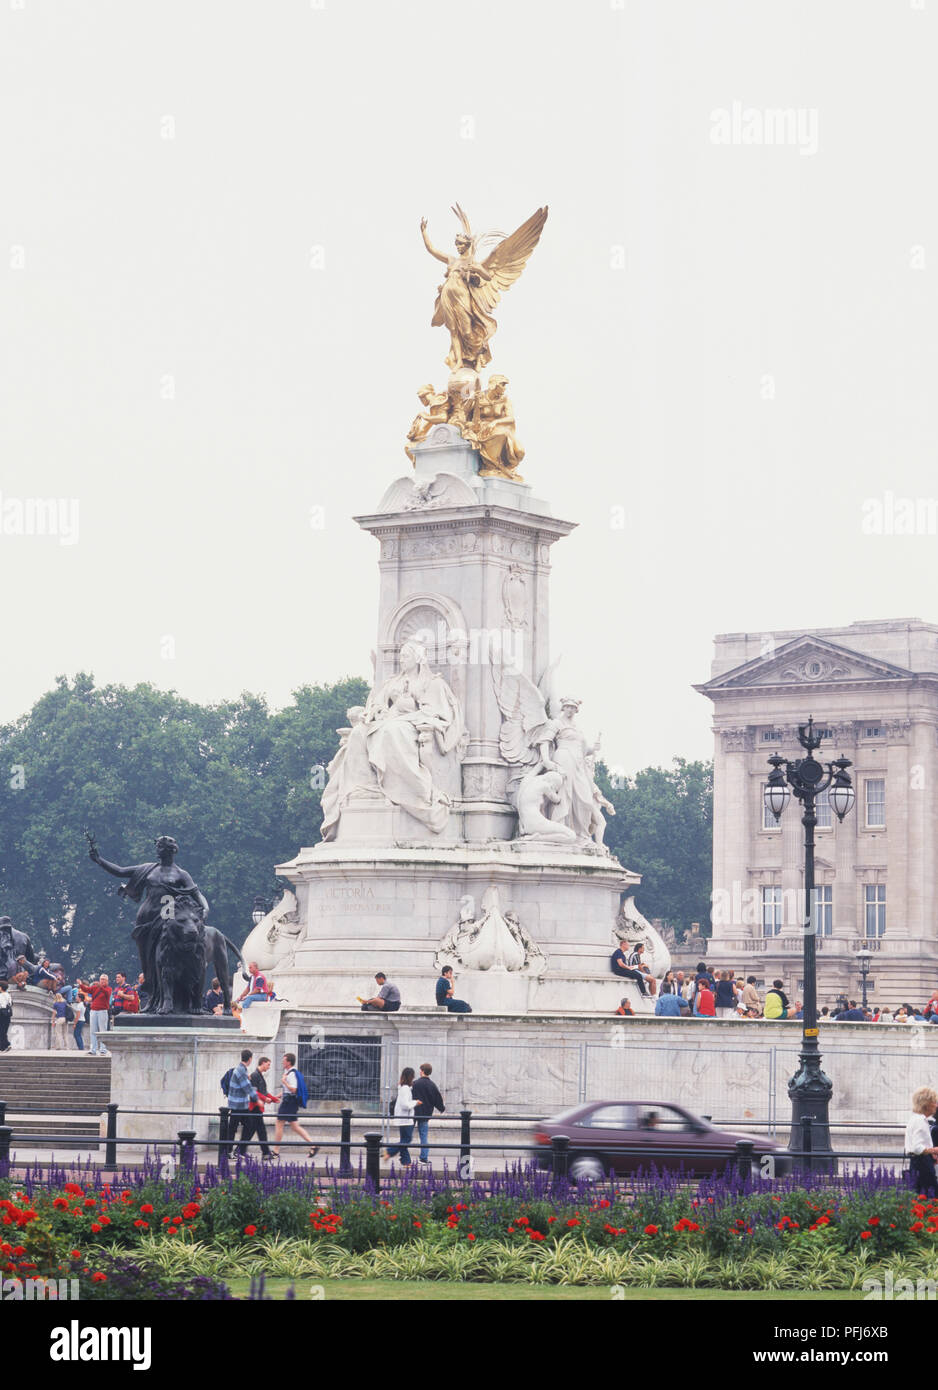 Great Britain, England, London, Victoria Memorial, statue in centre of roundabout outside Buckingham Palace, front view. Stock Photo